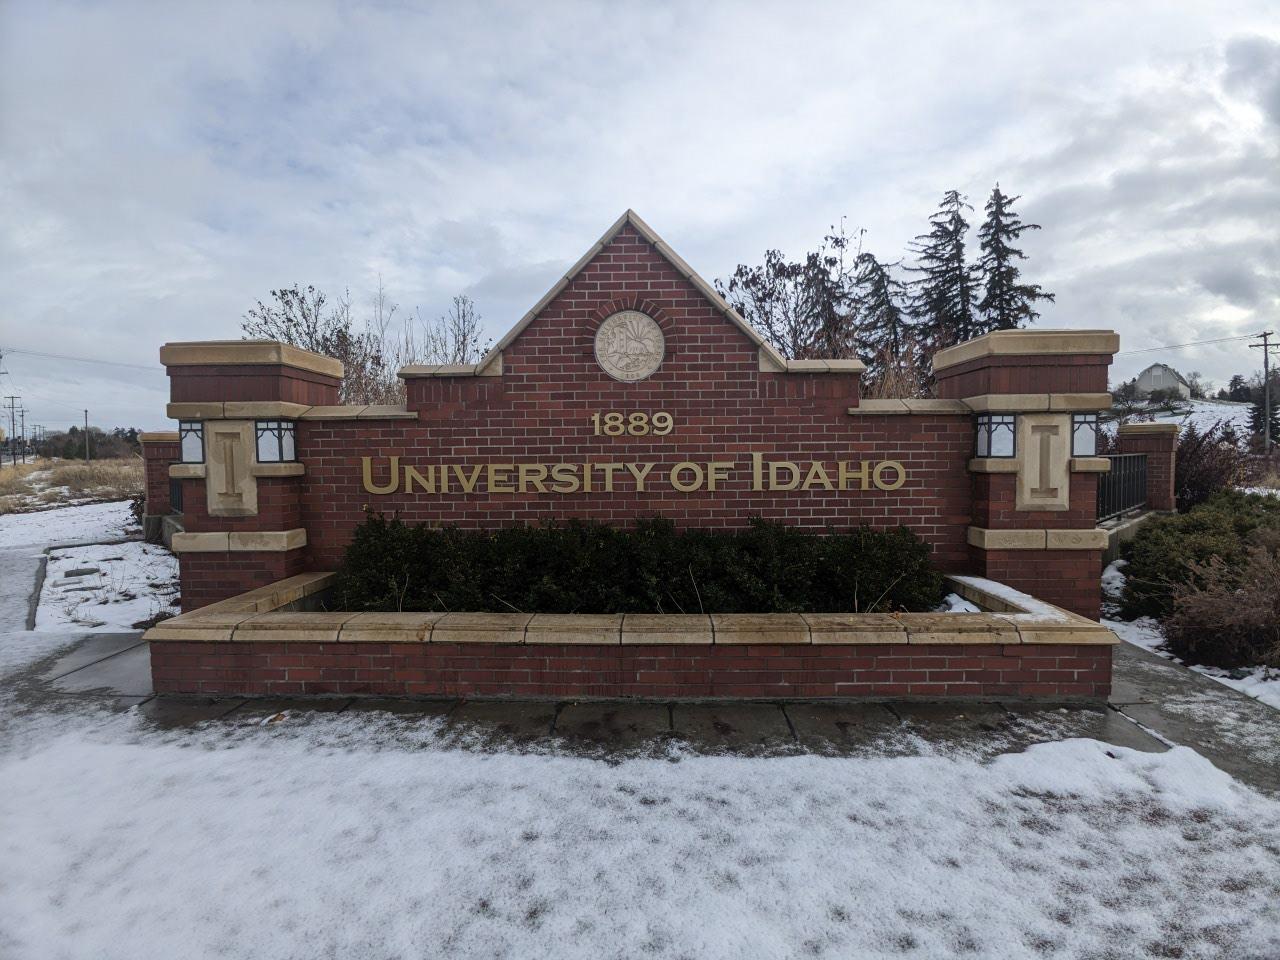 A University of Idaho sign fills the screen surrounded by brick and blue sky.